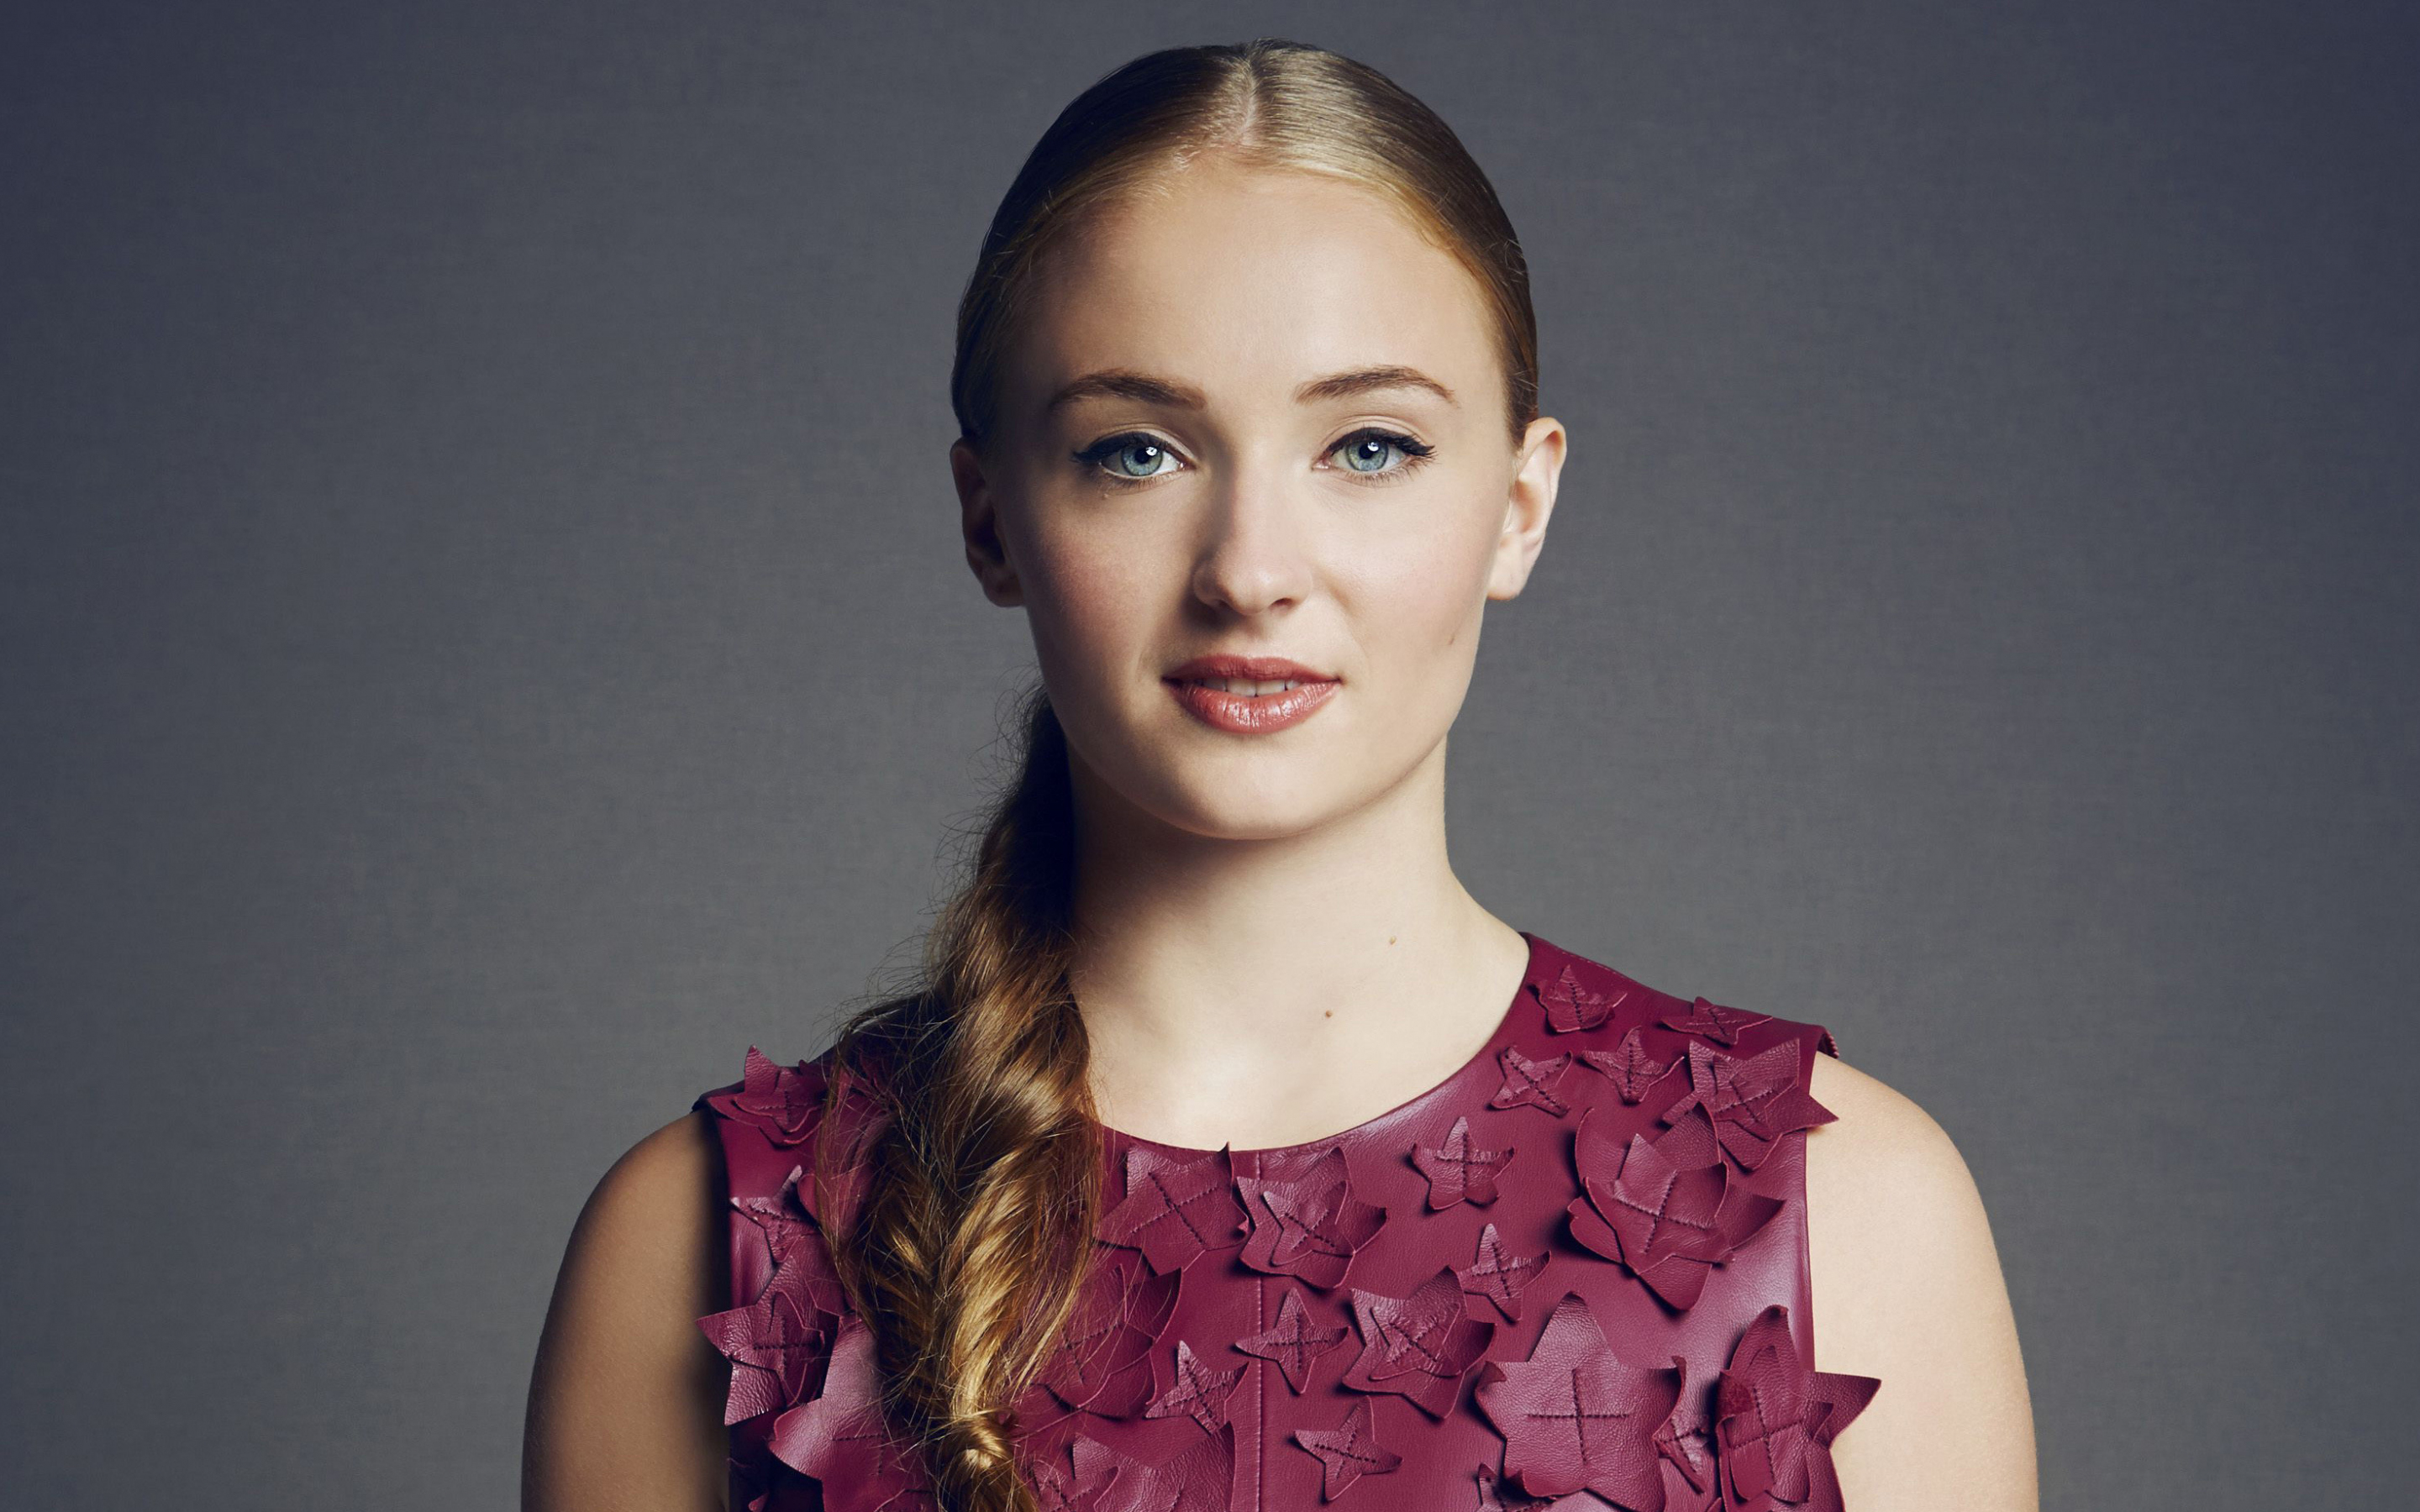 Sophie turner, marie claire, smile, 2018, 2880x1800 wallpaper